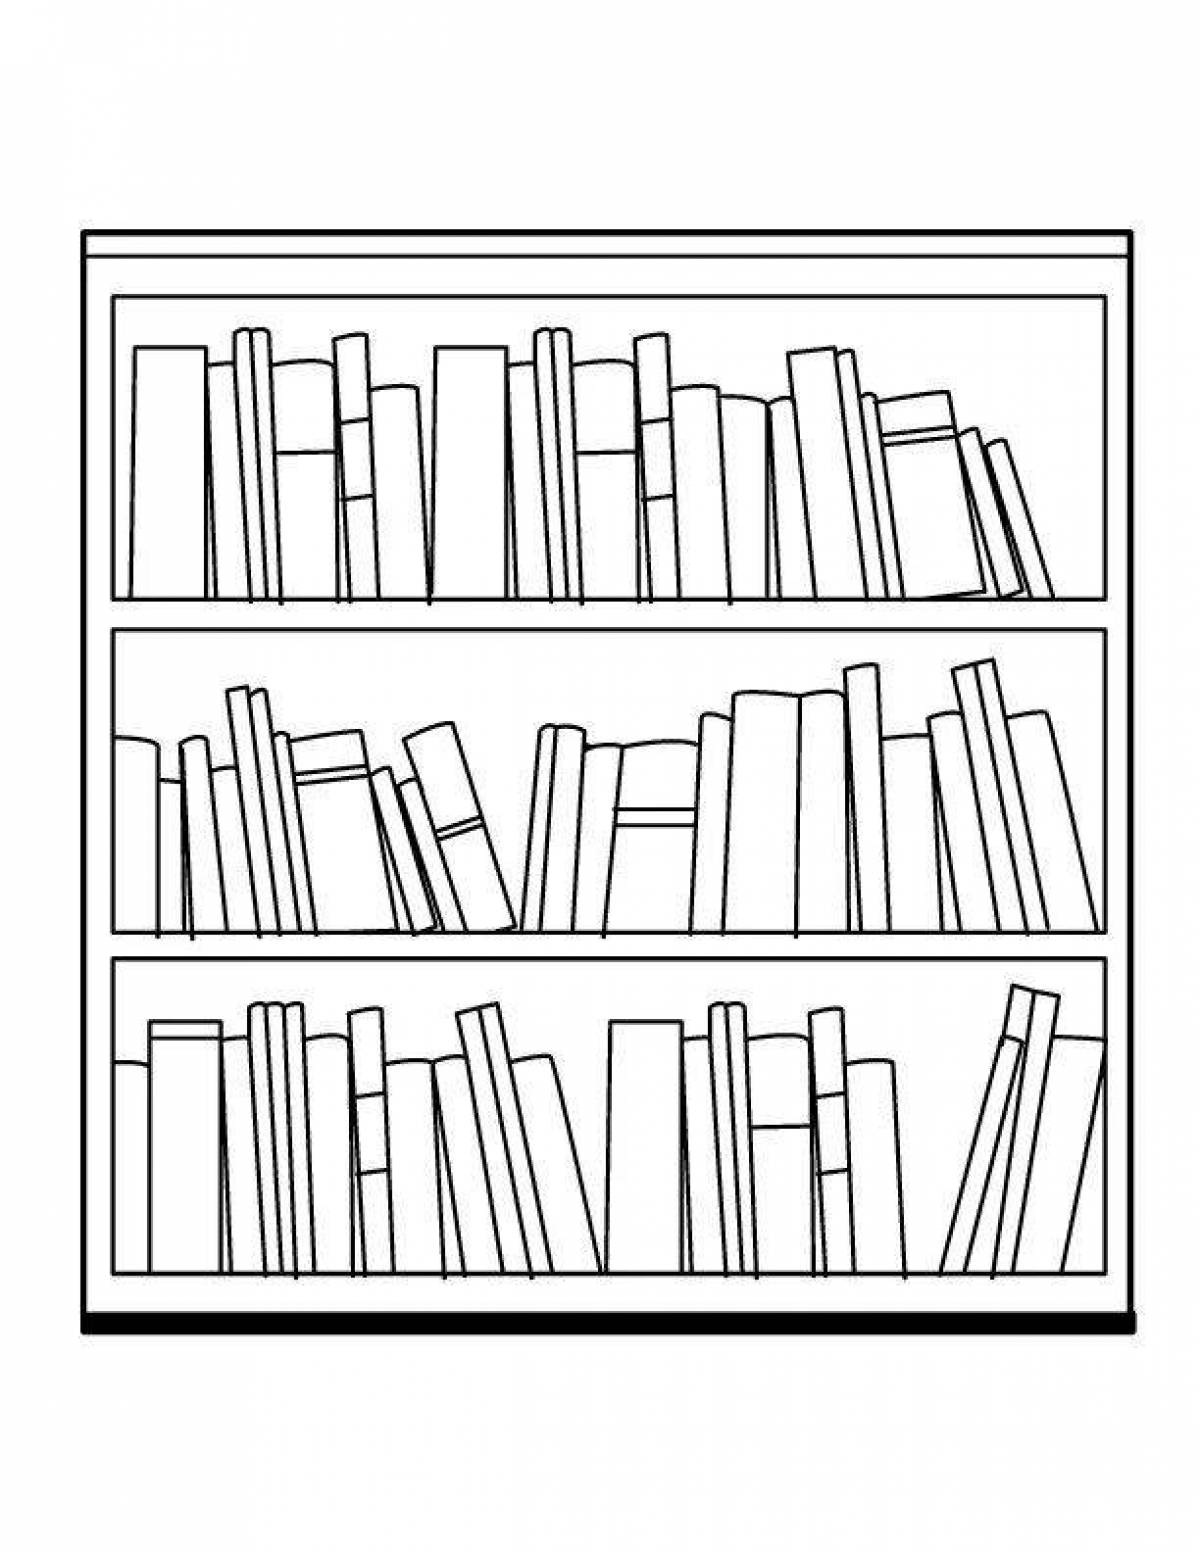 Coloring book majestic shelf with books